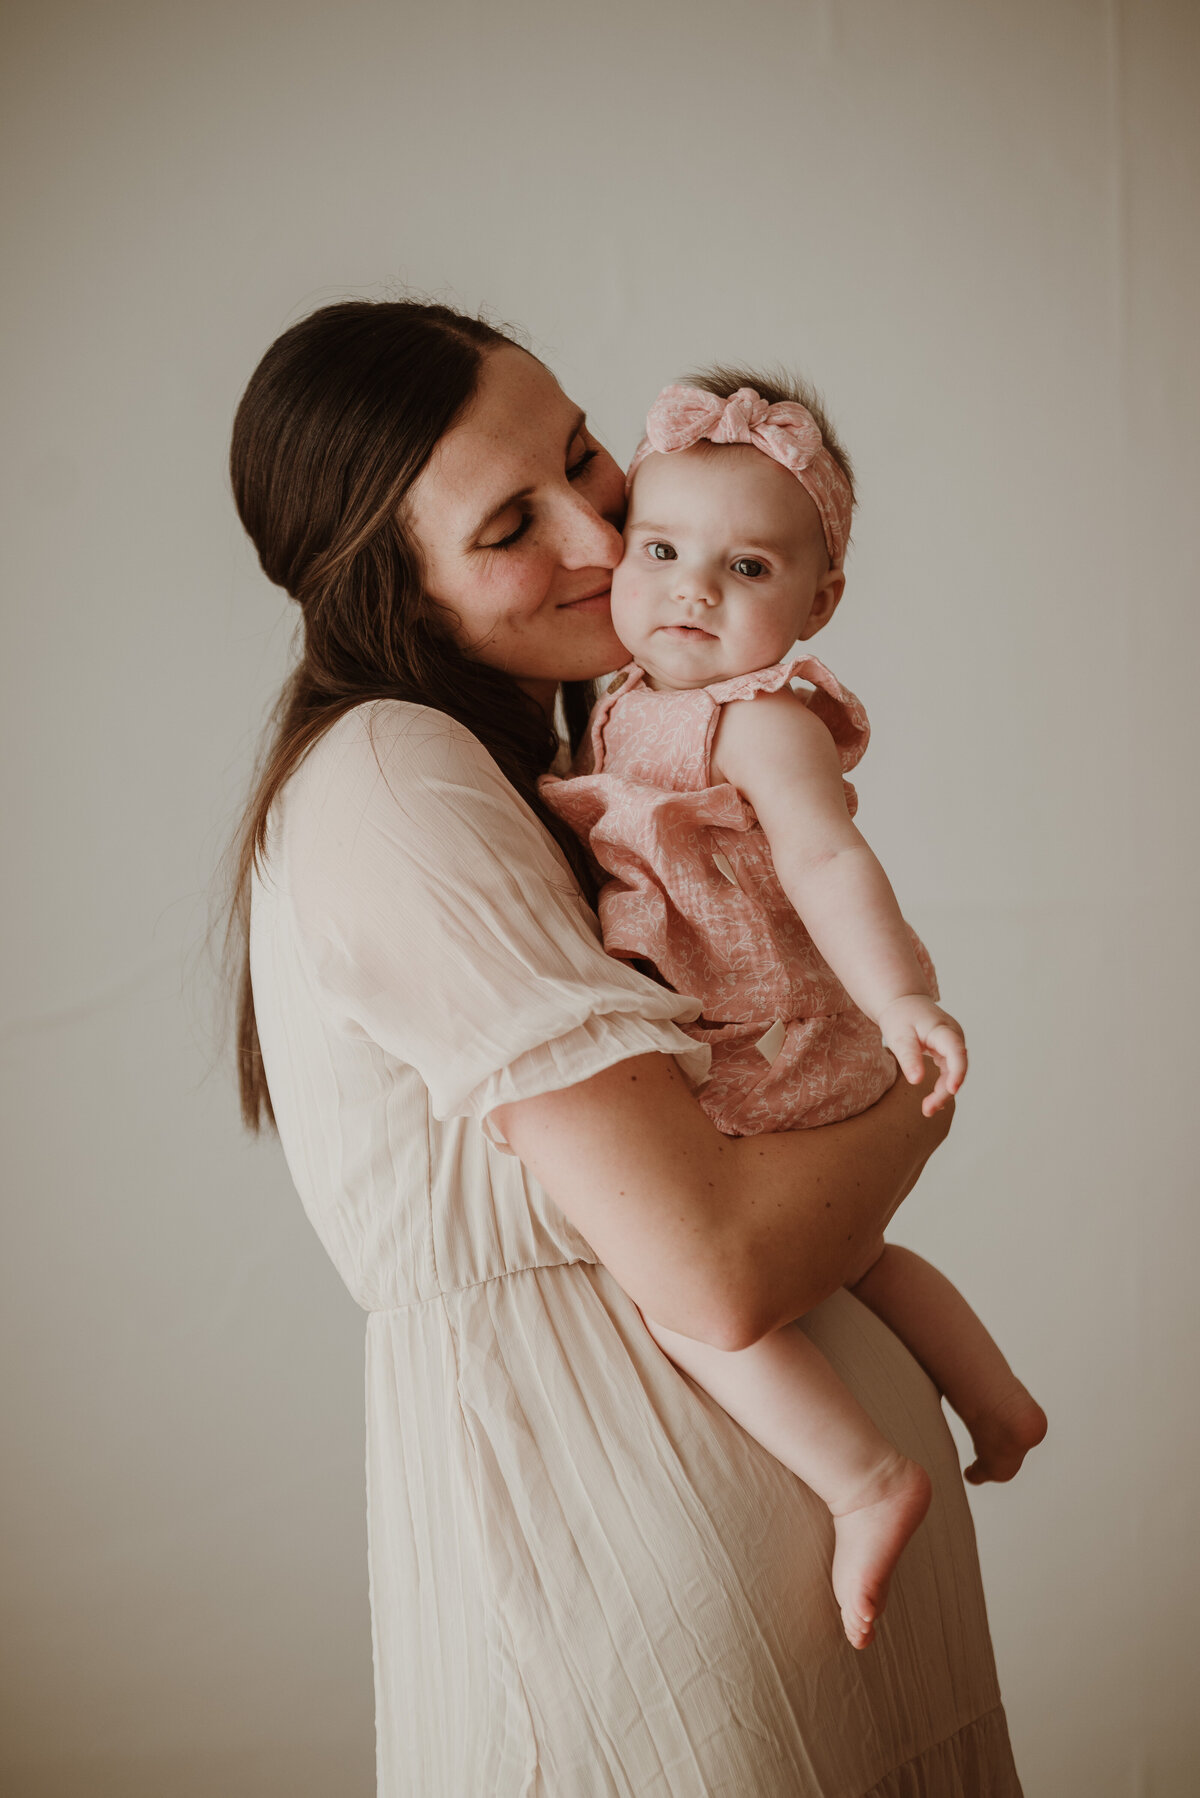 wenatchee baby photographer - abbygale marie photography10